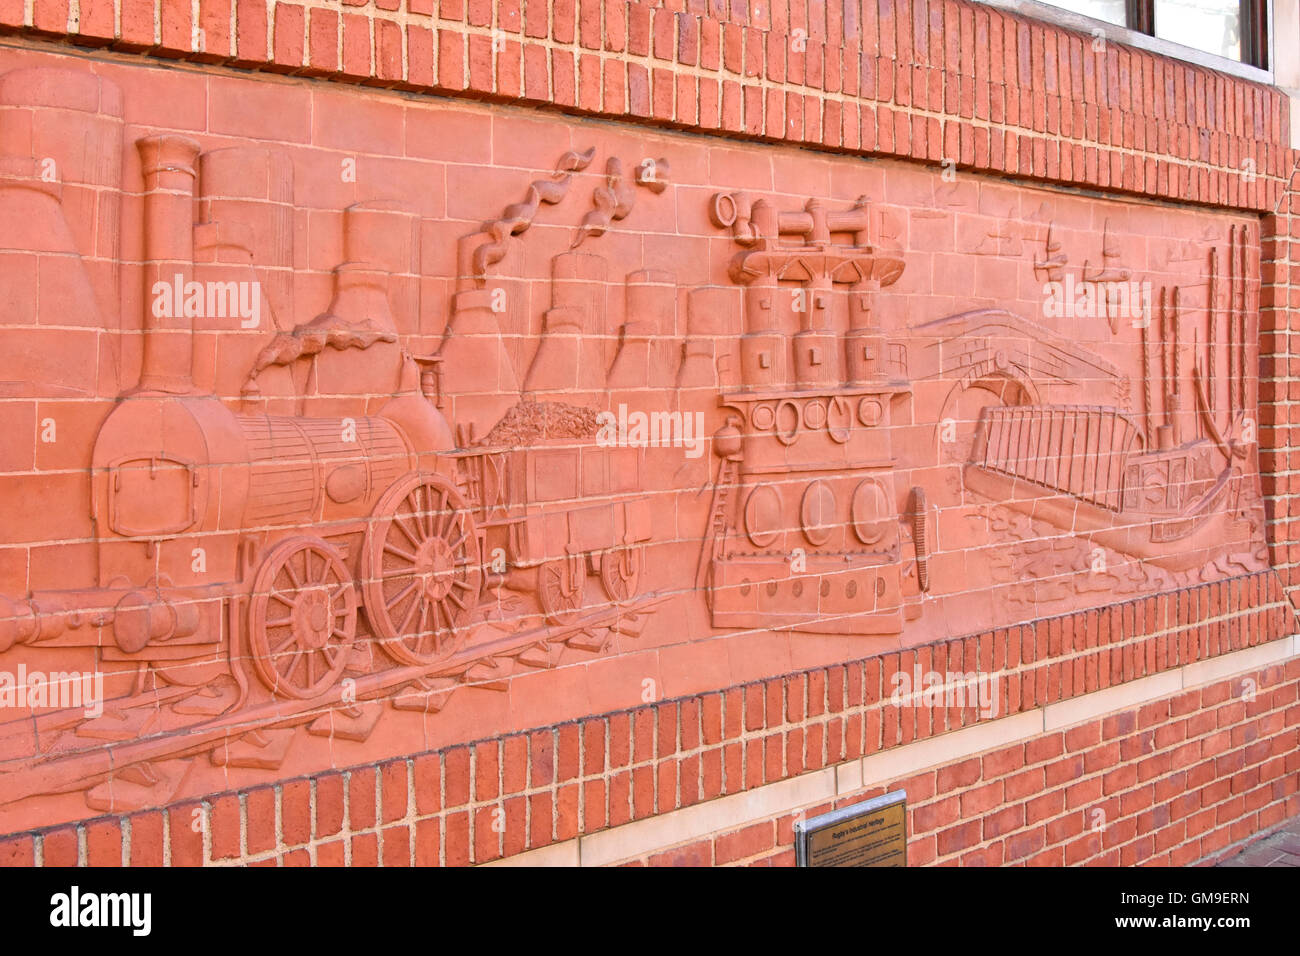 A brick frieze illustrating the historical Industrial Heritage of the UK town of Rugby in Warwickshire including railways aviation and canals Stock Photo